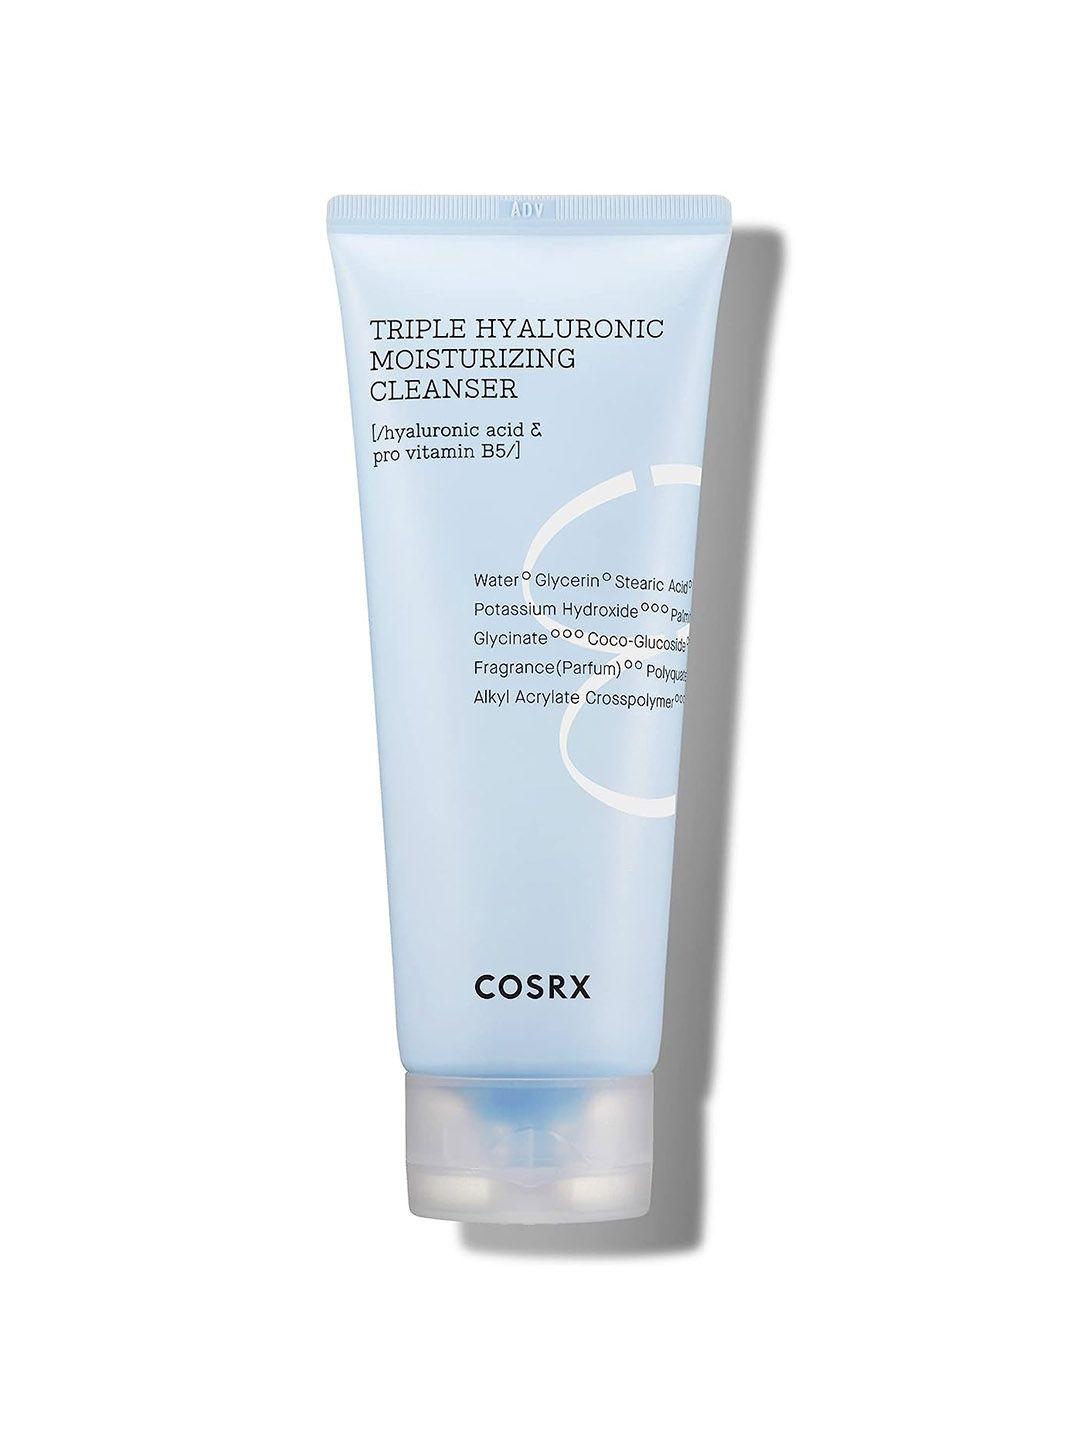 cosrx triple hyaluronic moisturizing cleanser with pro vitamin b5 - 150 ml